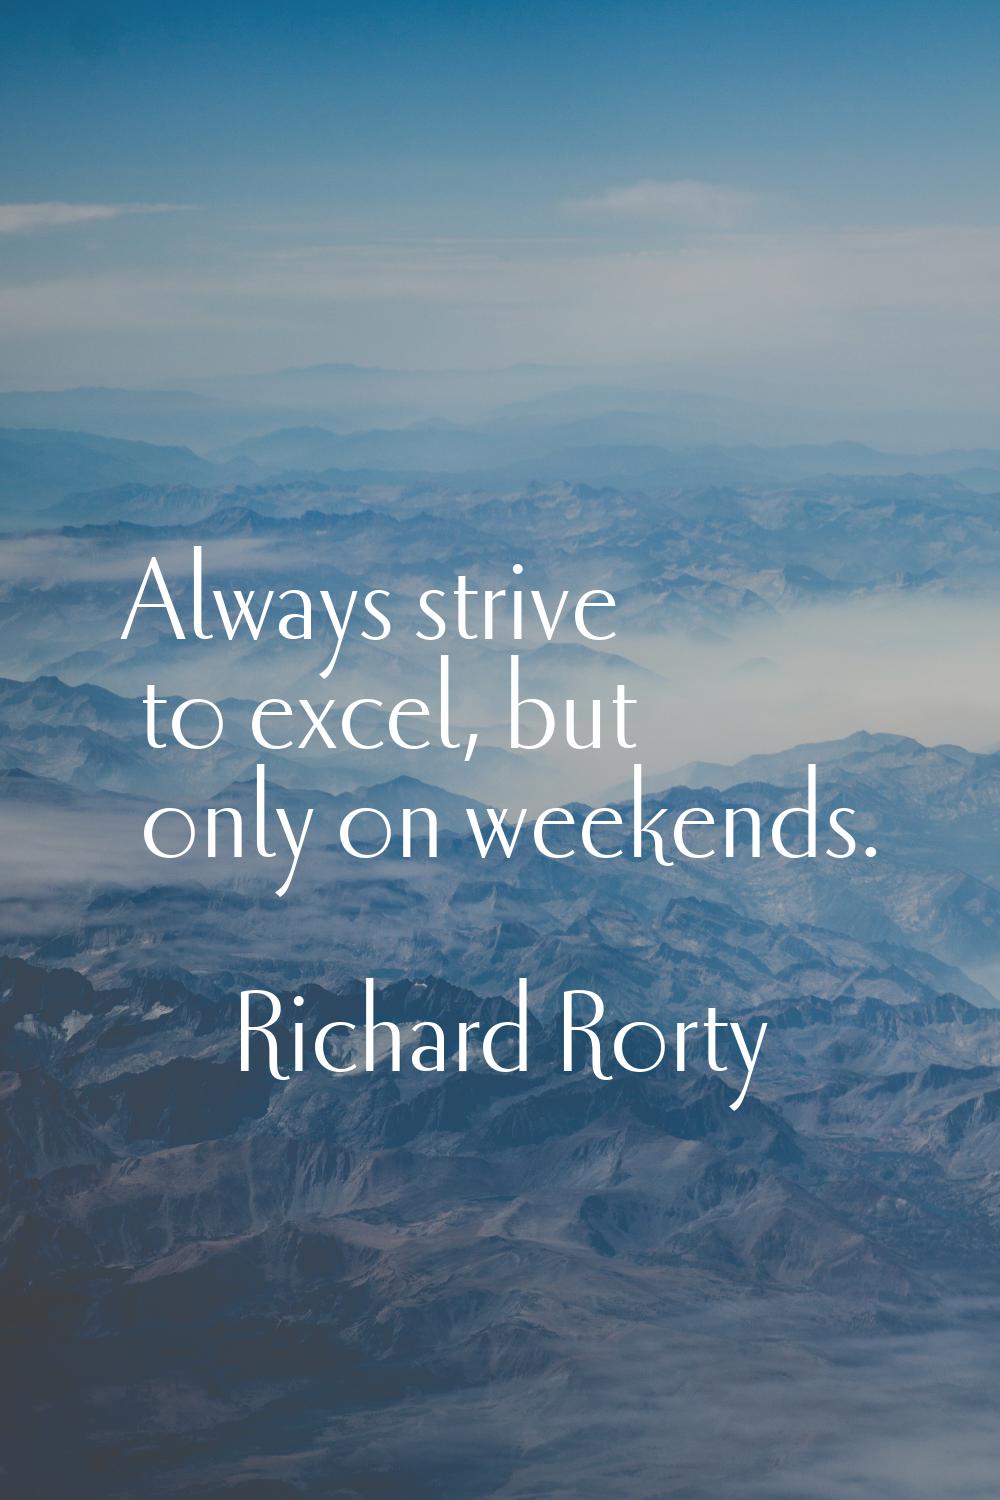 Always strive to excel, but only on weekends.